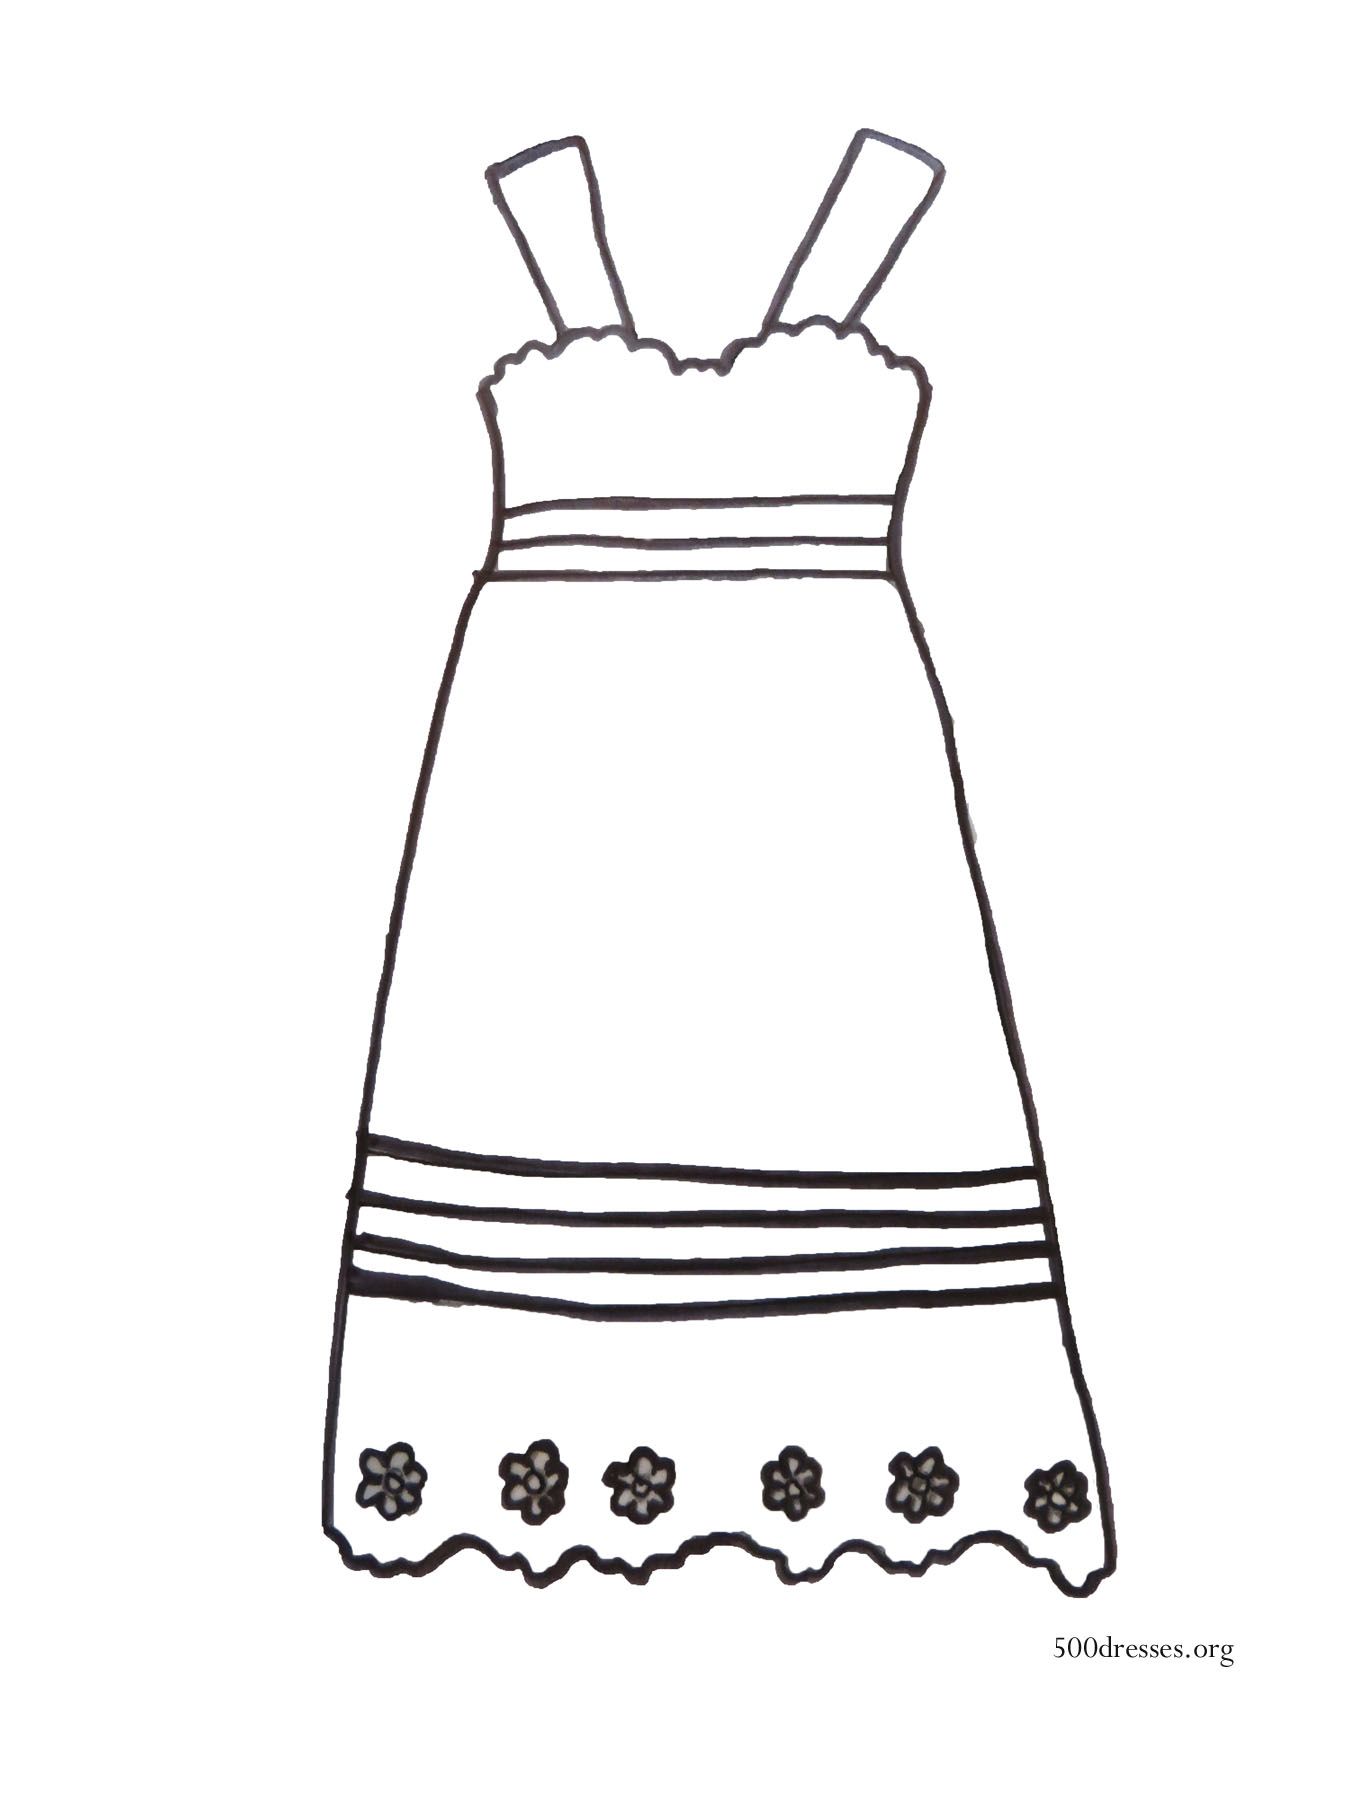 Dress Coloring Page | Coloring Pages for Kids and for Adults